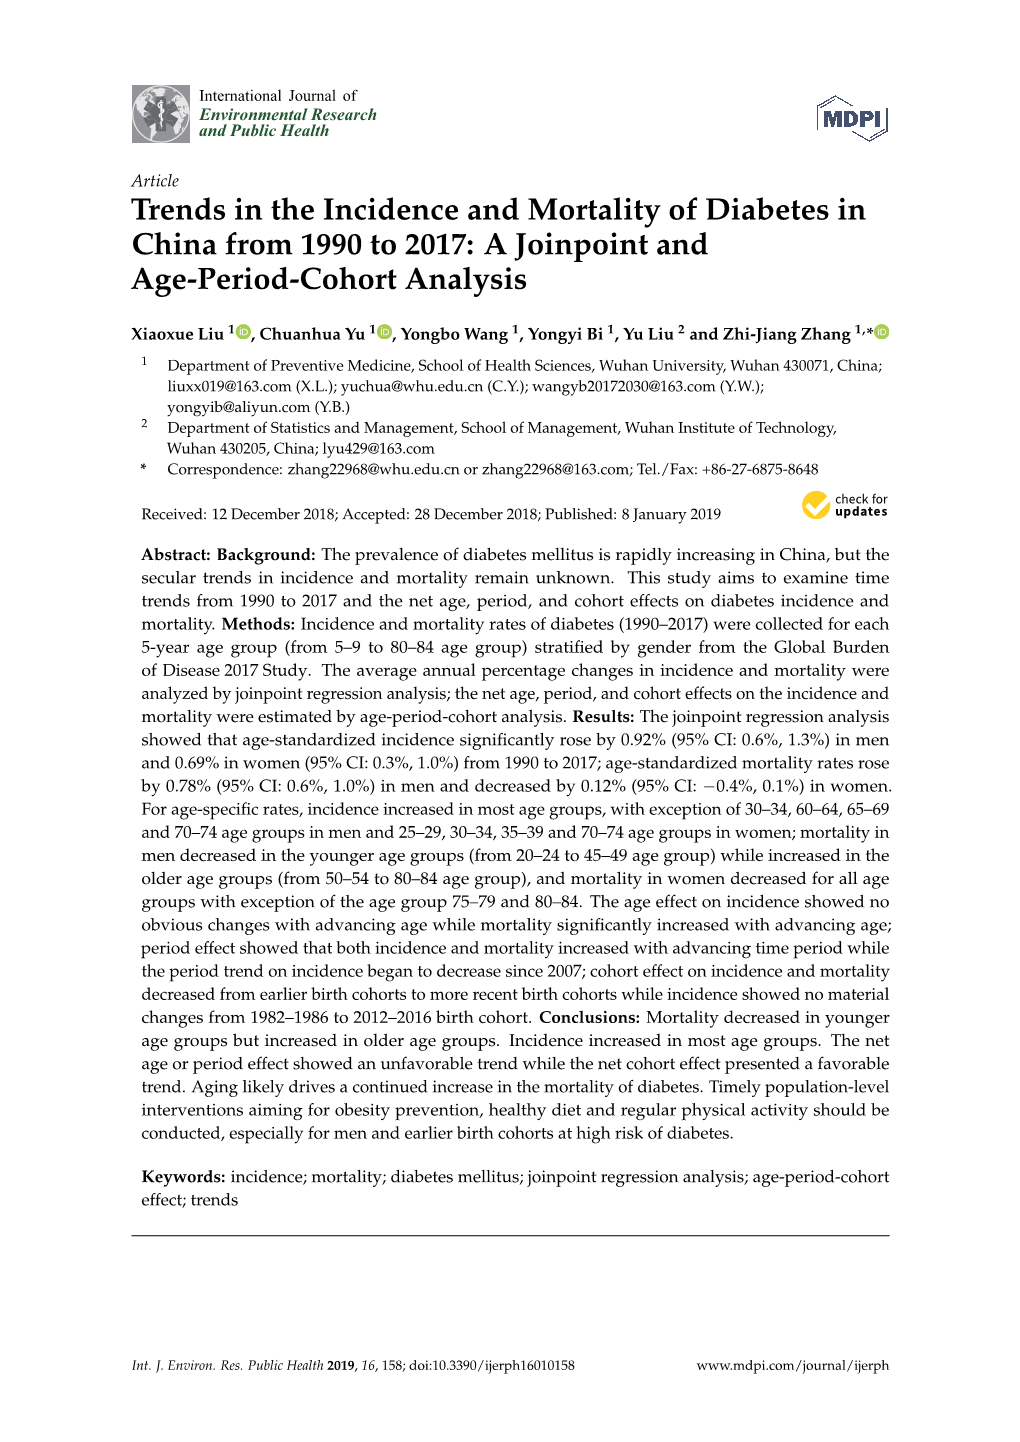 Trends in the Incidence and Mortality of Diabetes in China from 1990 to 2017: a Joinpoint and Age-Period-Cohort Analysis